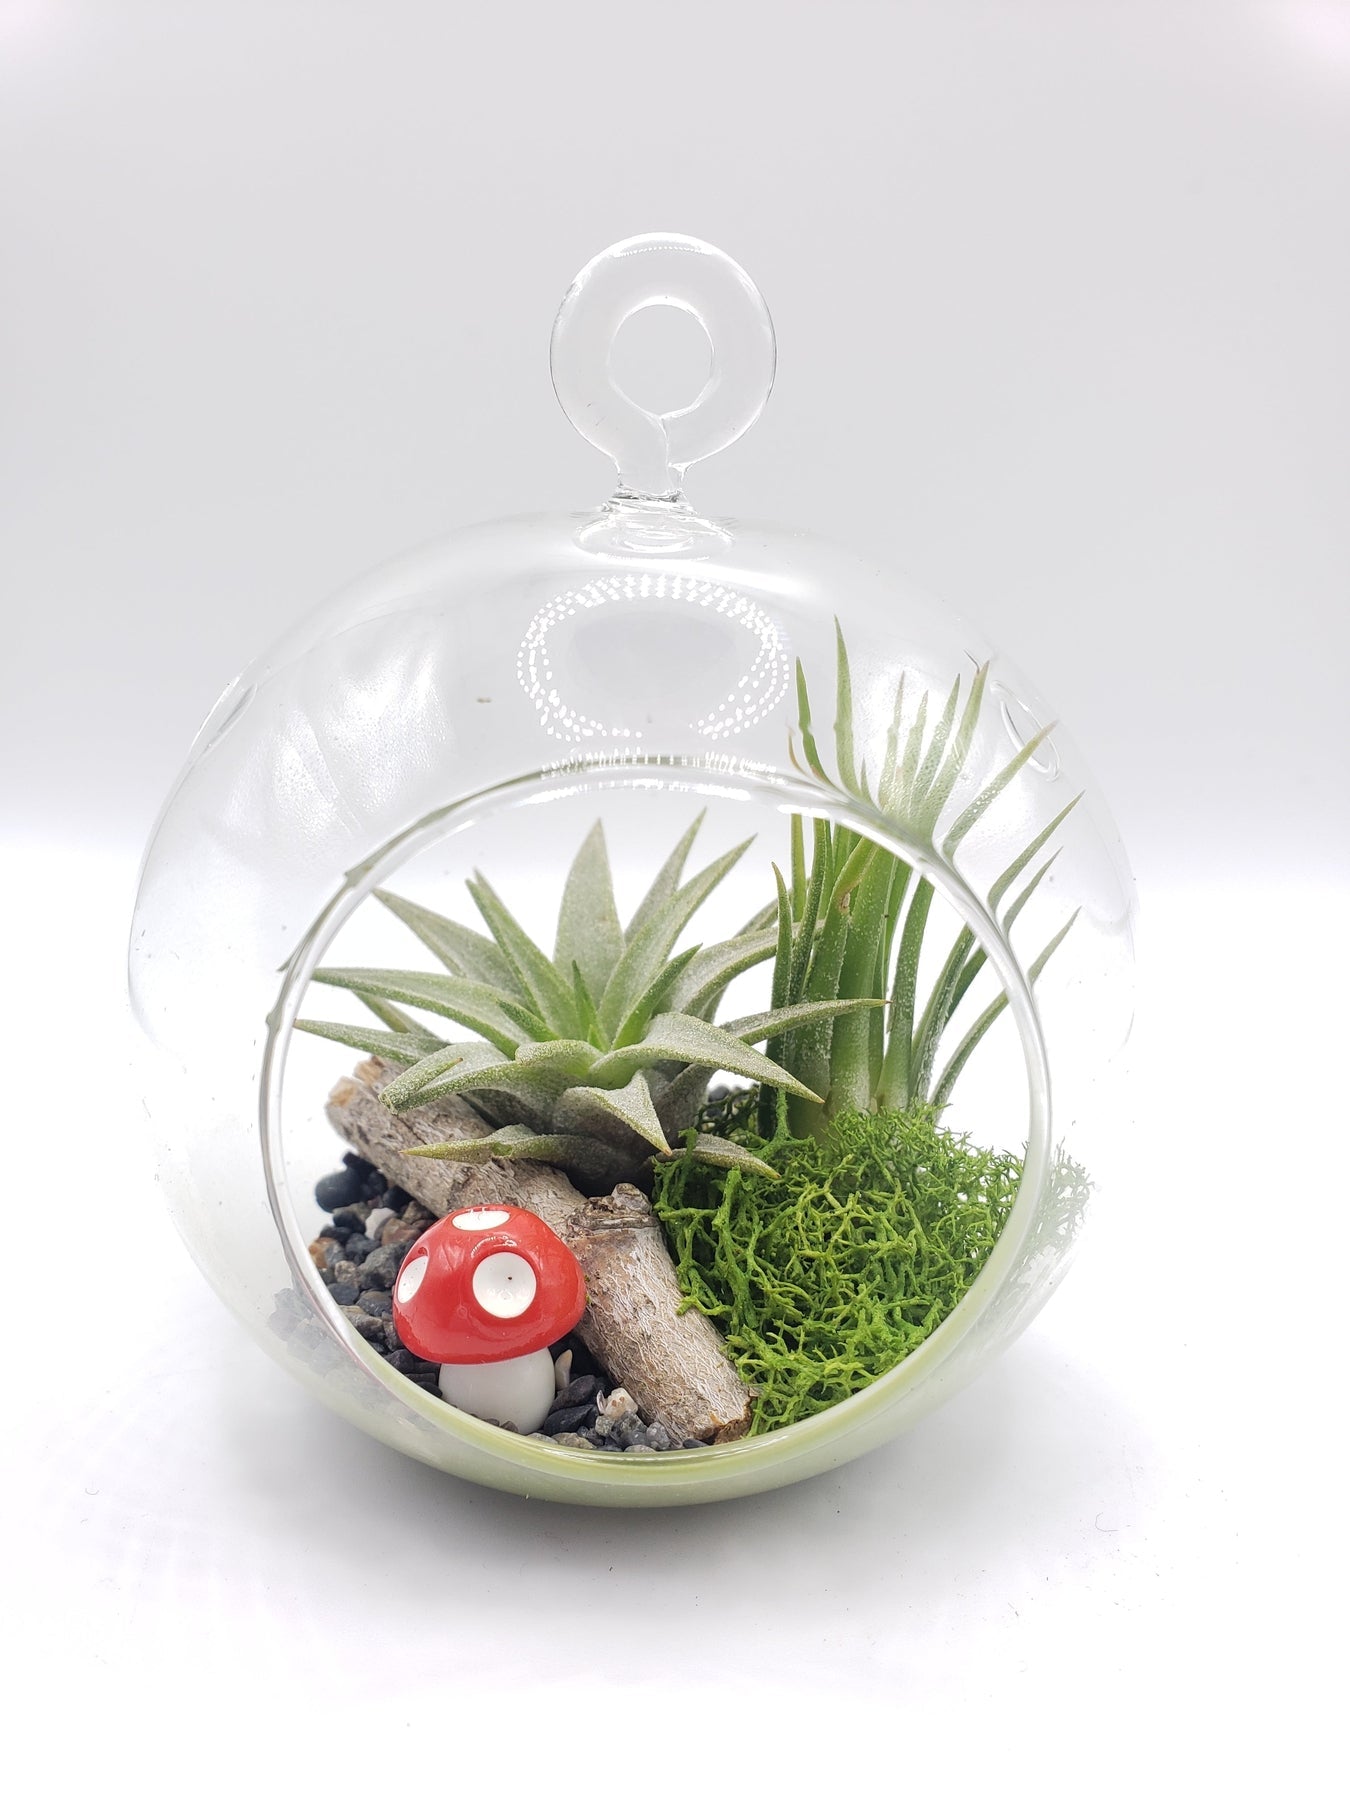 Adult Craft Kit, DIY Craft, Personalized Gift, Air Plant Kit